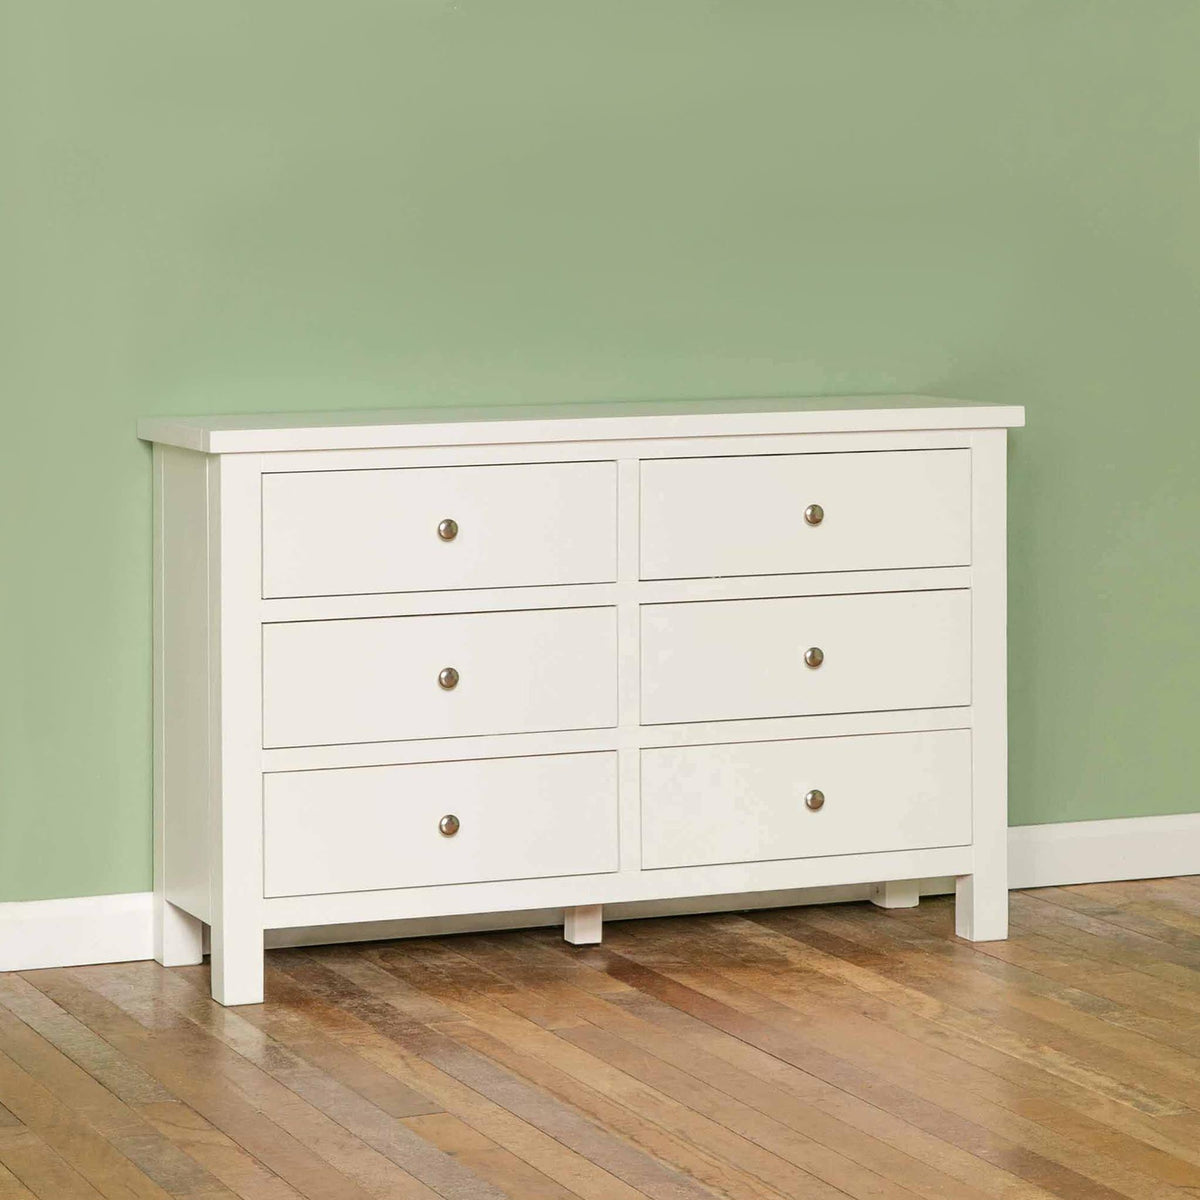 Cornish White Wooden Chest of 6 Drawers - Lifestyle side view